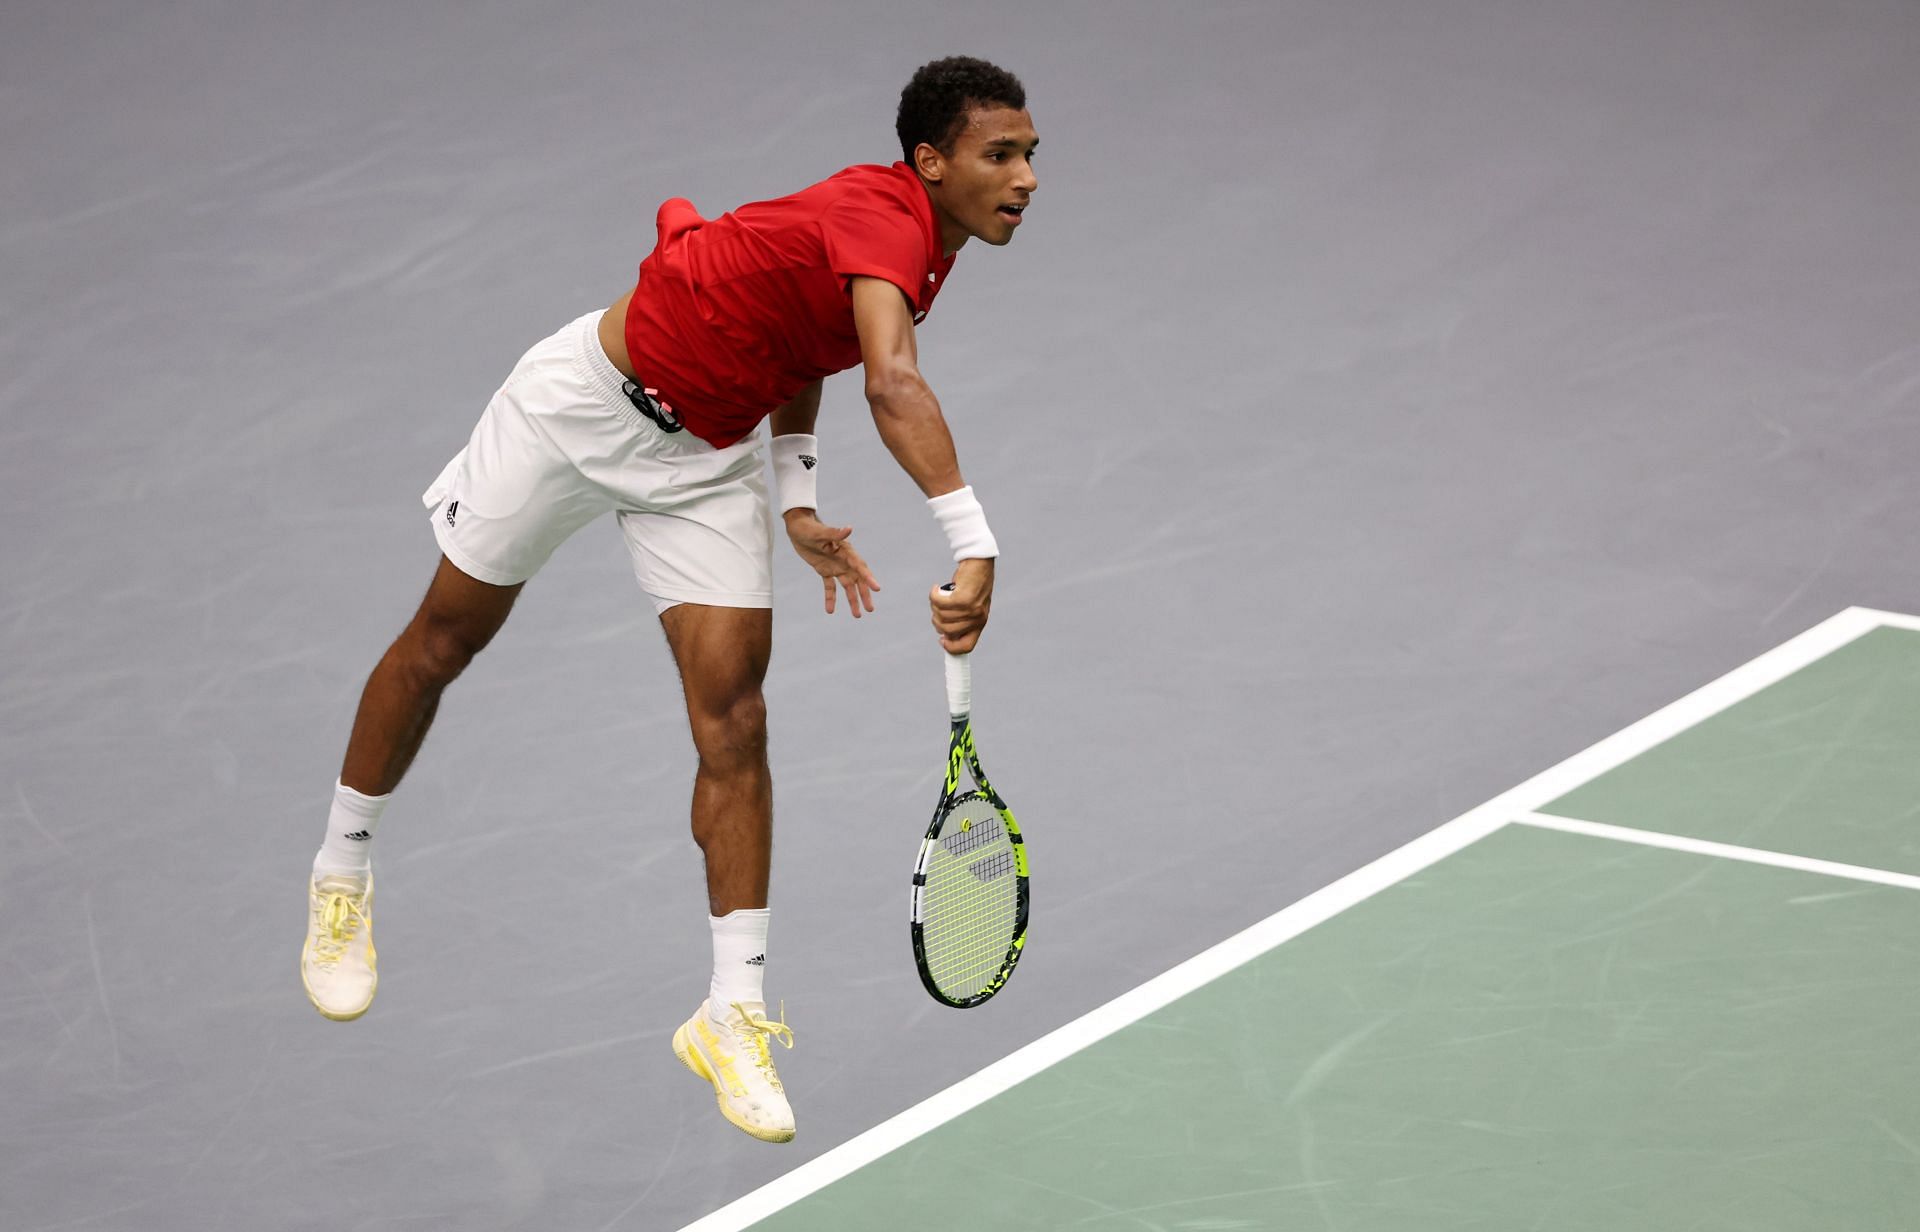 Felix Auger Aliassime in action at Davis Cup. Photo by Clive Brunskill/Getty Images